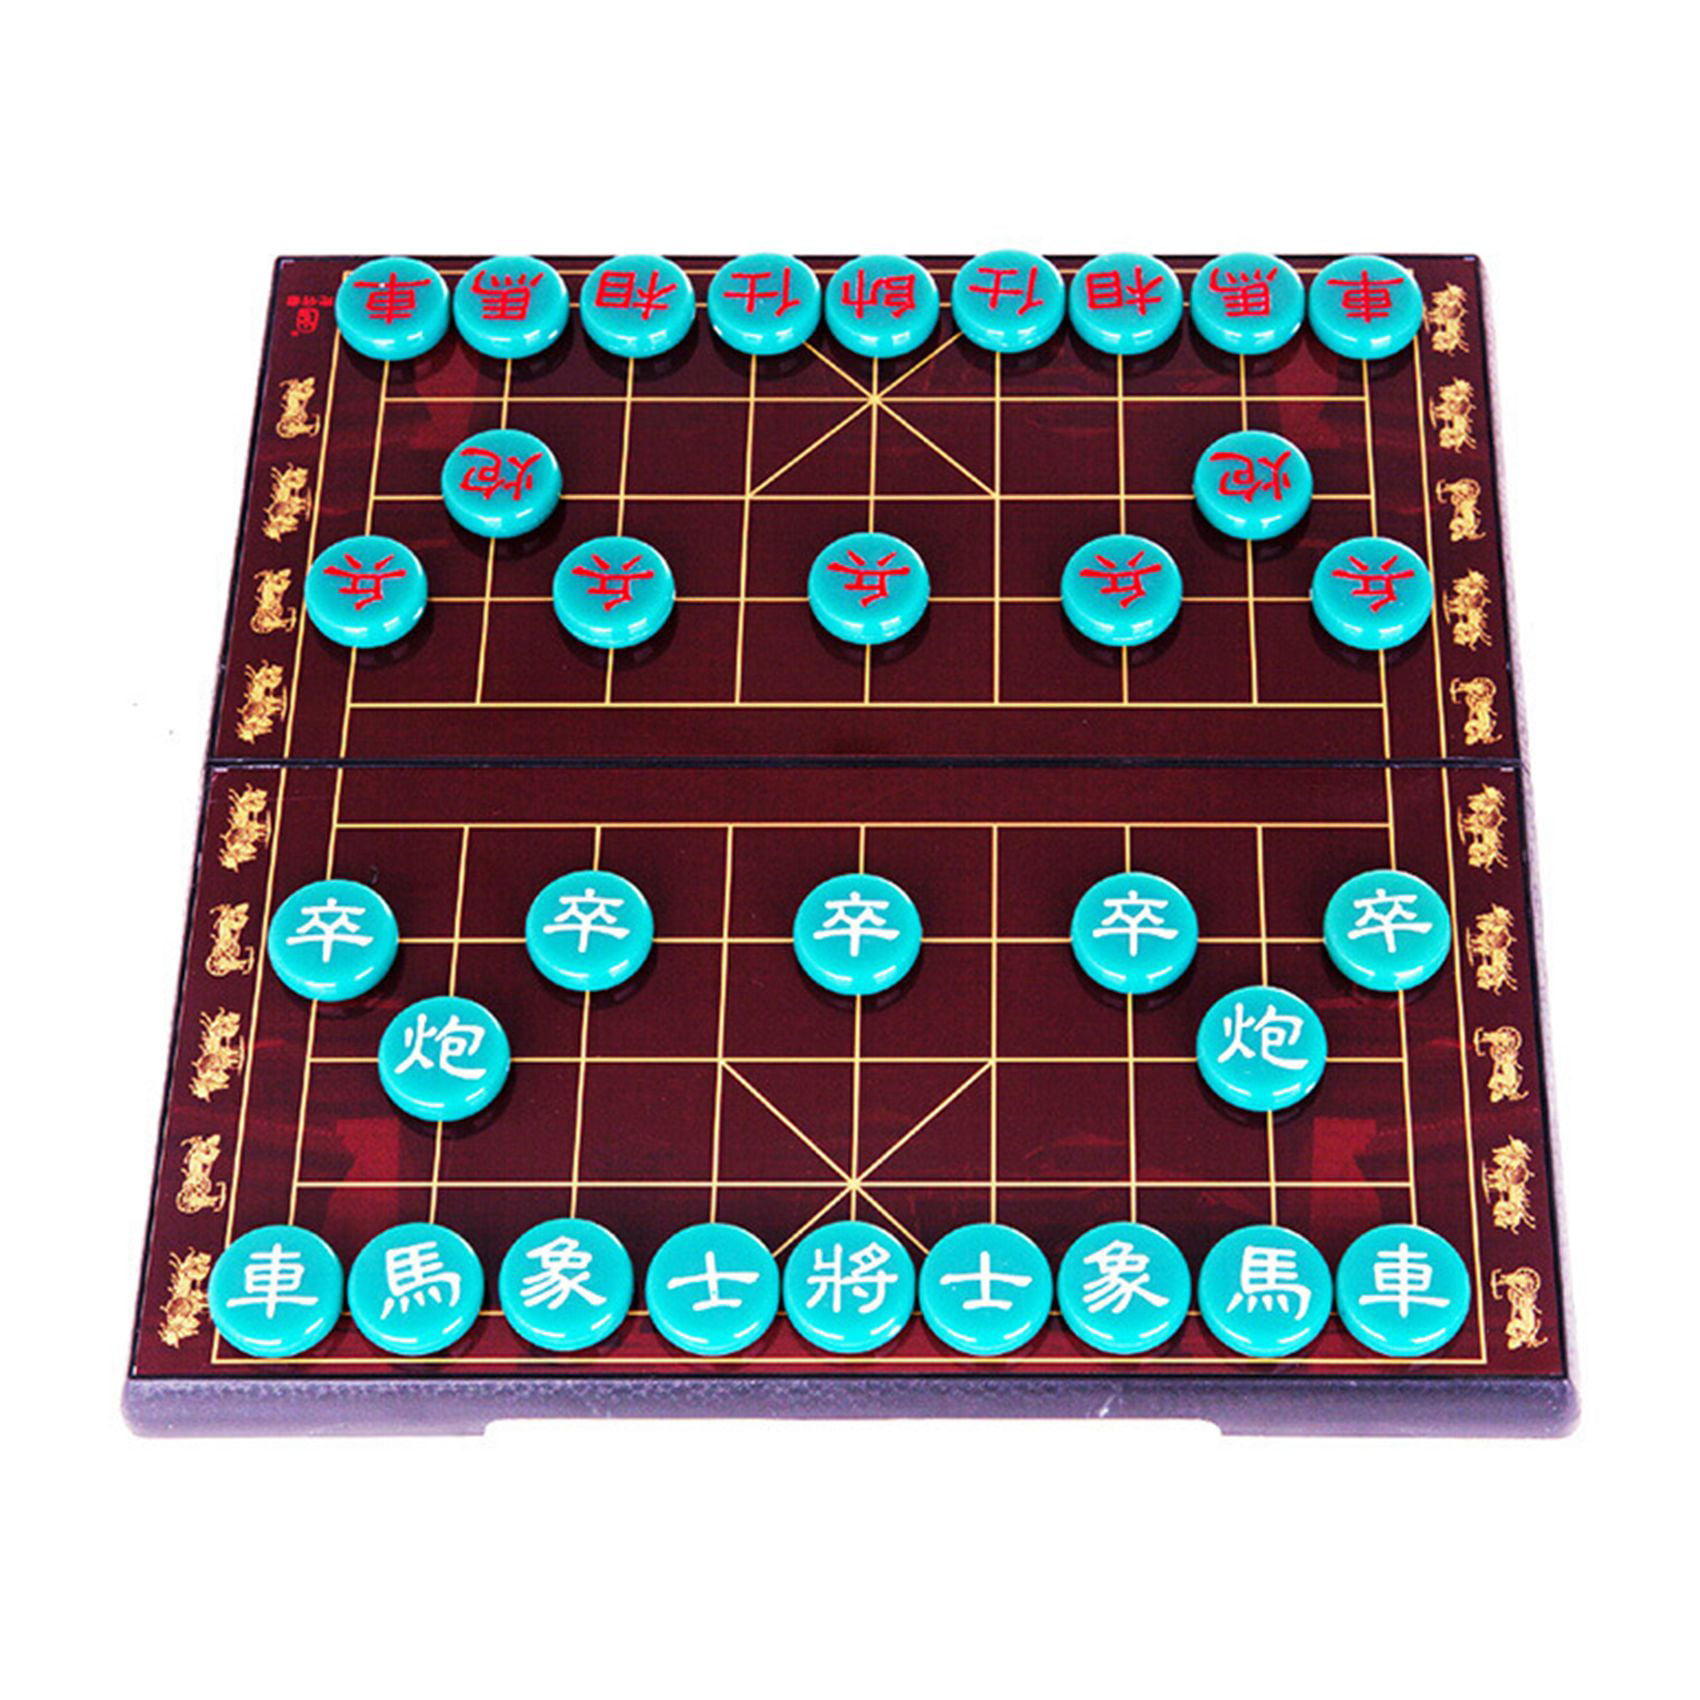 Portable Xiangqi Chinese Chess Set Magnetic Foldable Board Game Family Game 